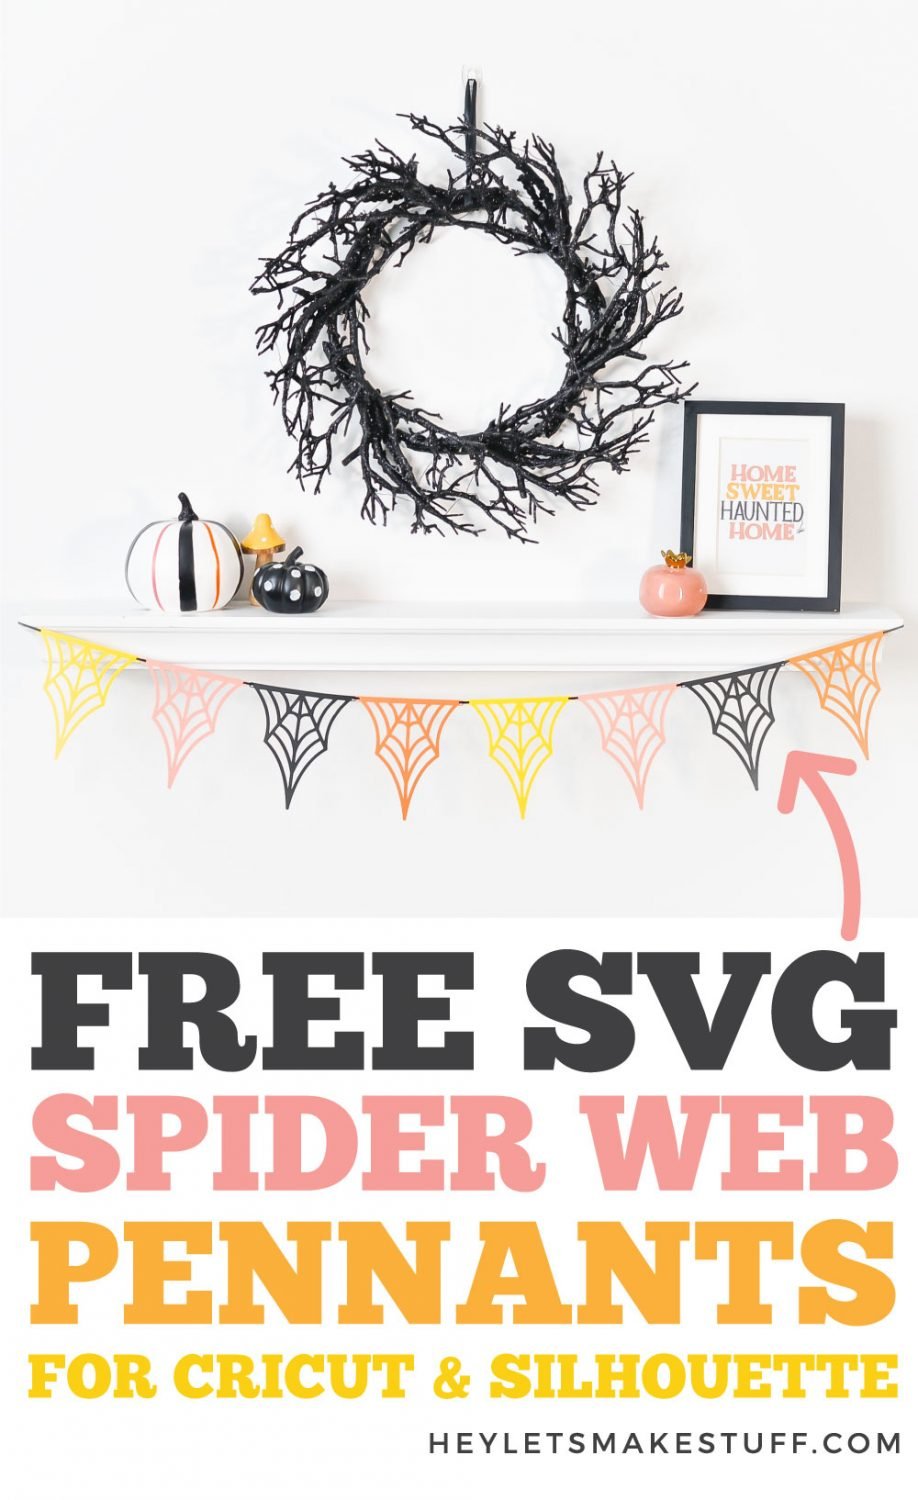 Spider web banner pin image